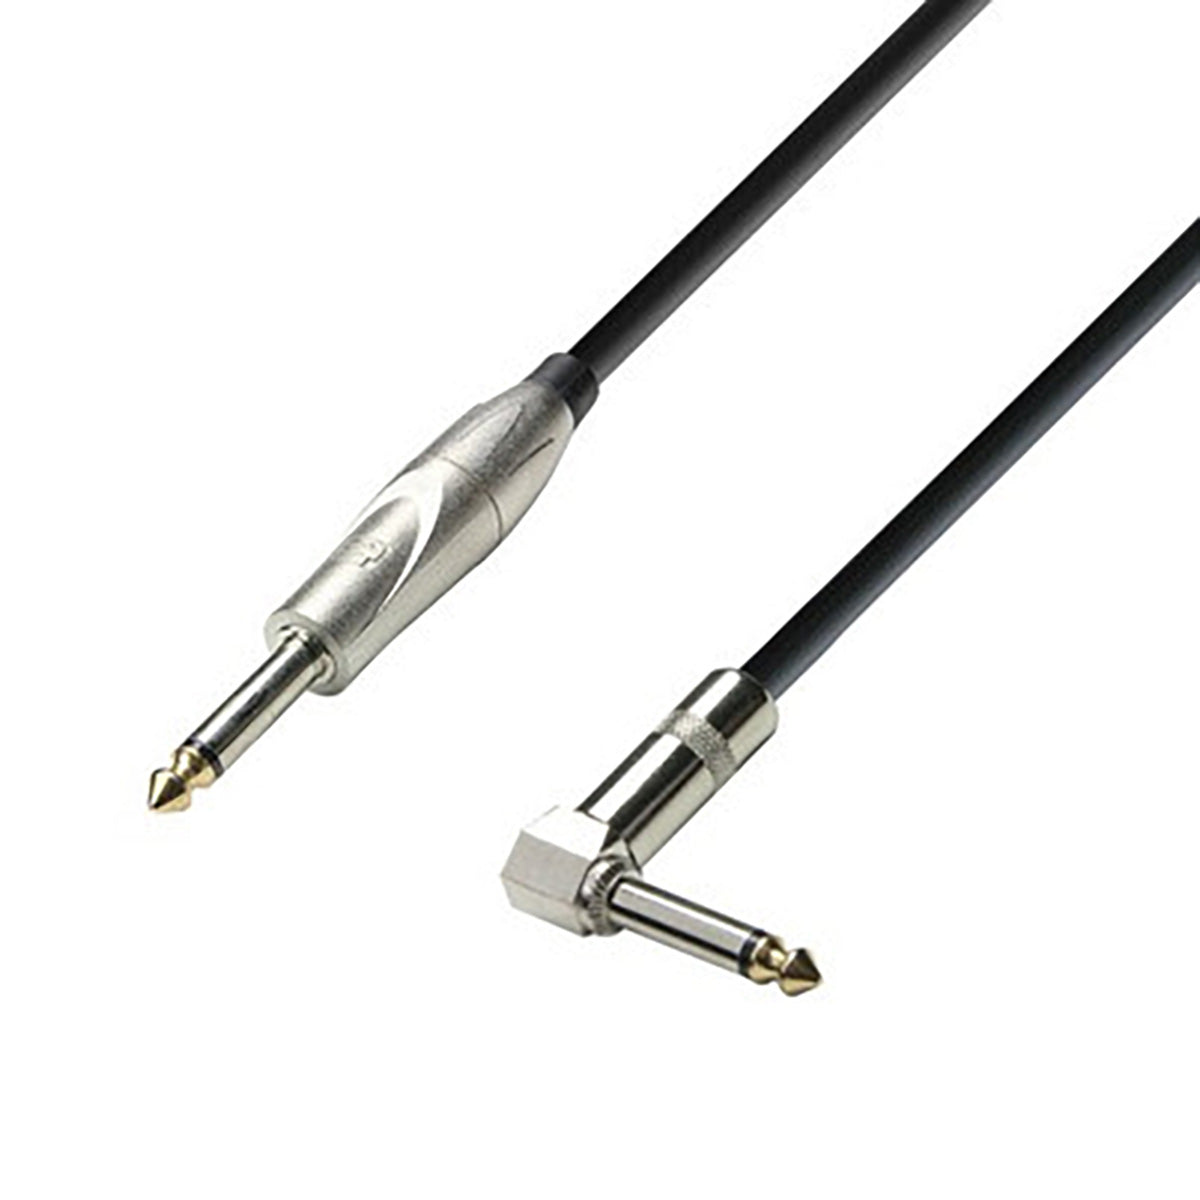 Adam Hall Cables K3 IPR 0300 - Instrument Cable 6.3mm Jack mono to 6.3mm angled Jack mono 3m